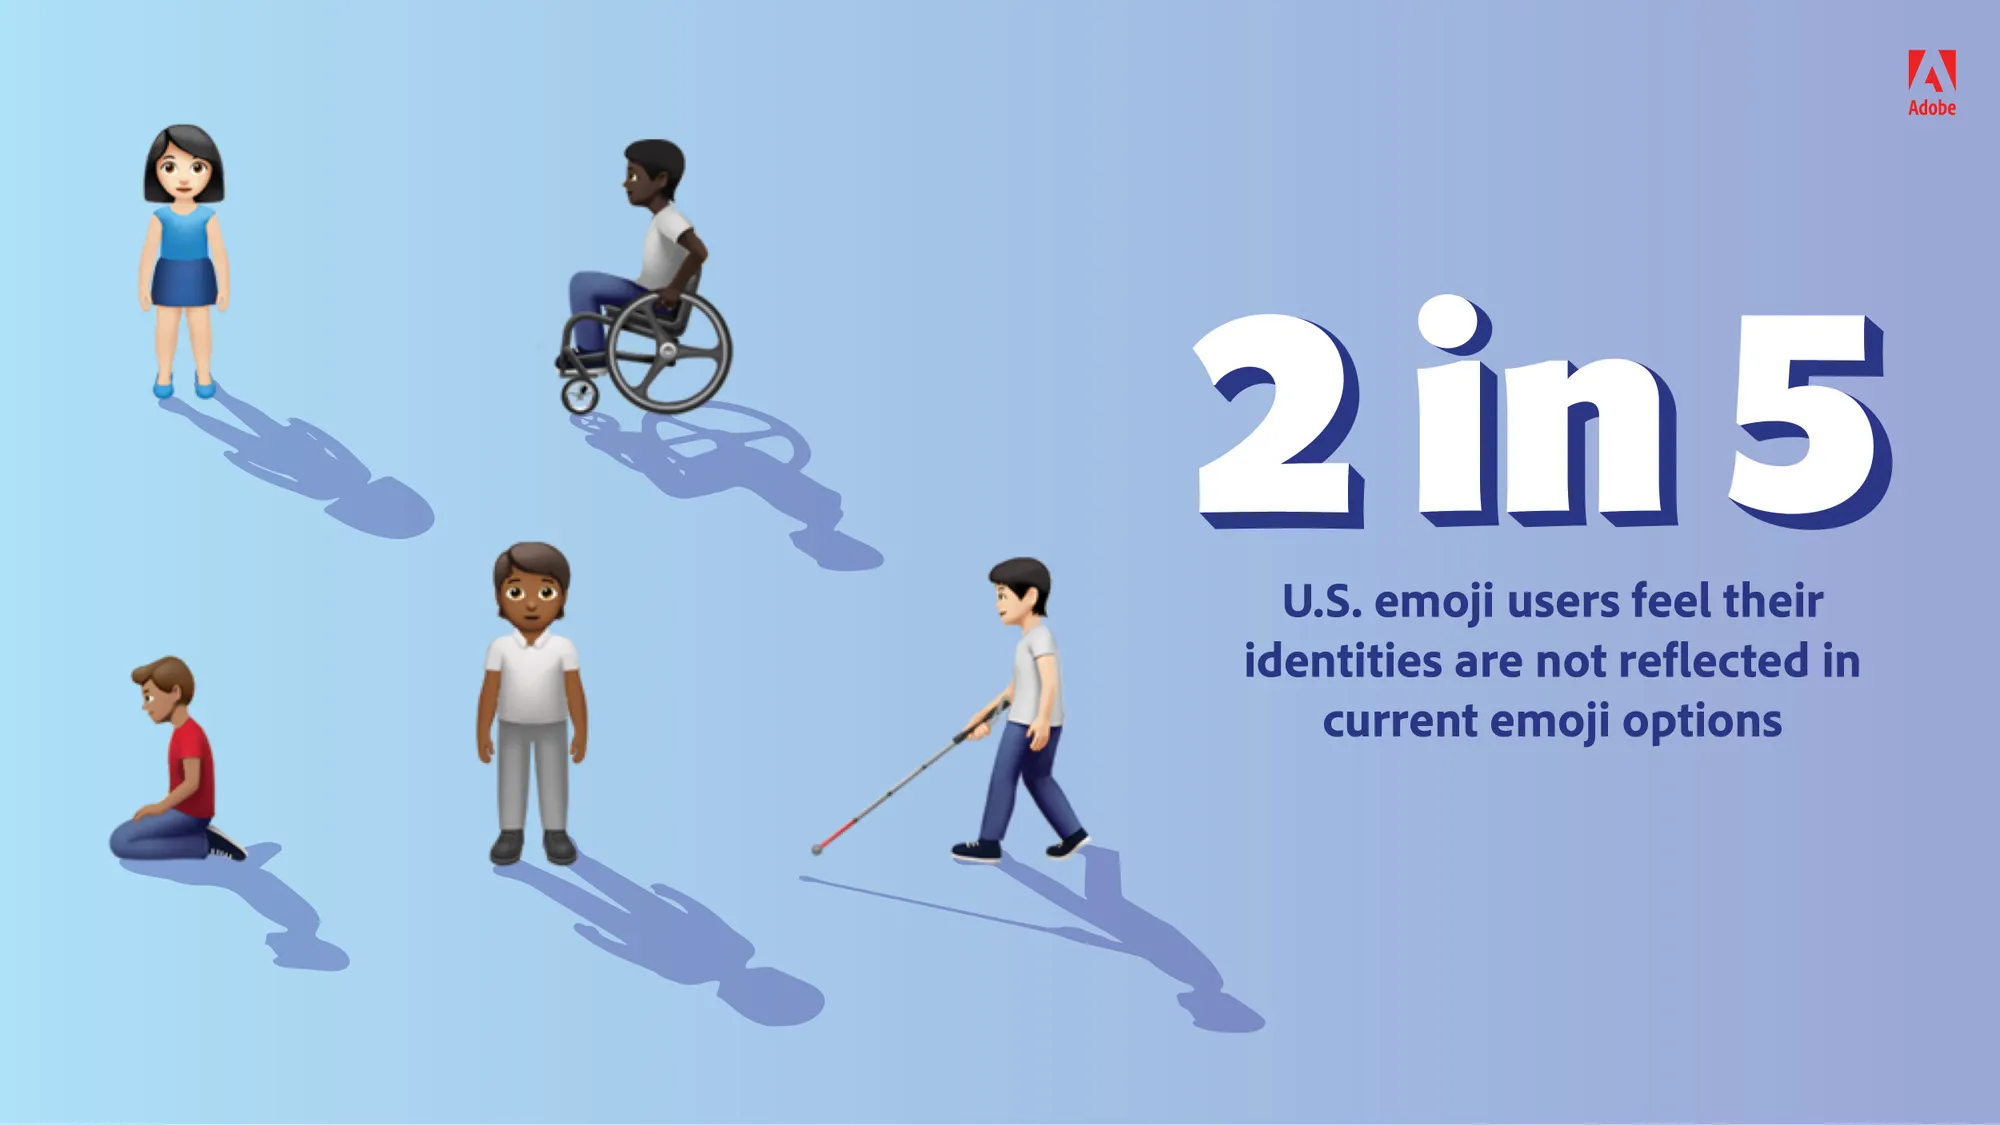 2 in 5 U.S. emoji users feel their identities are not reflected in current emoji options. 